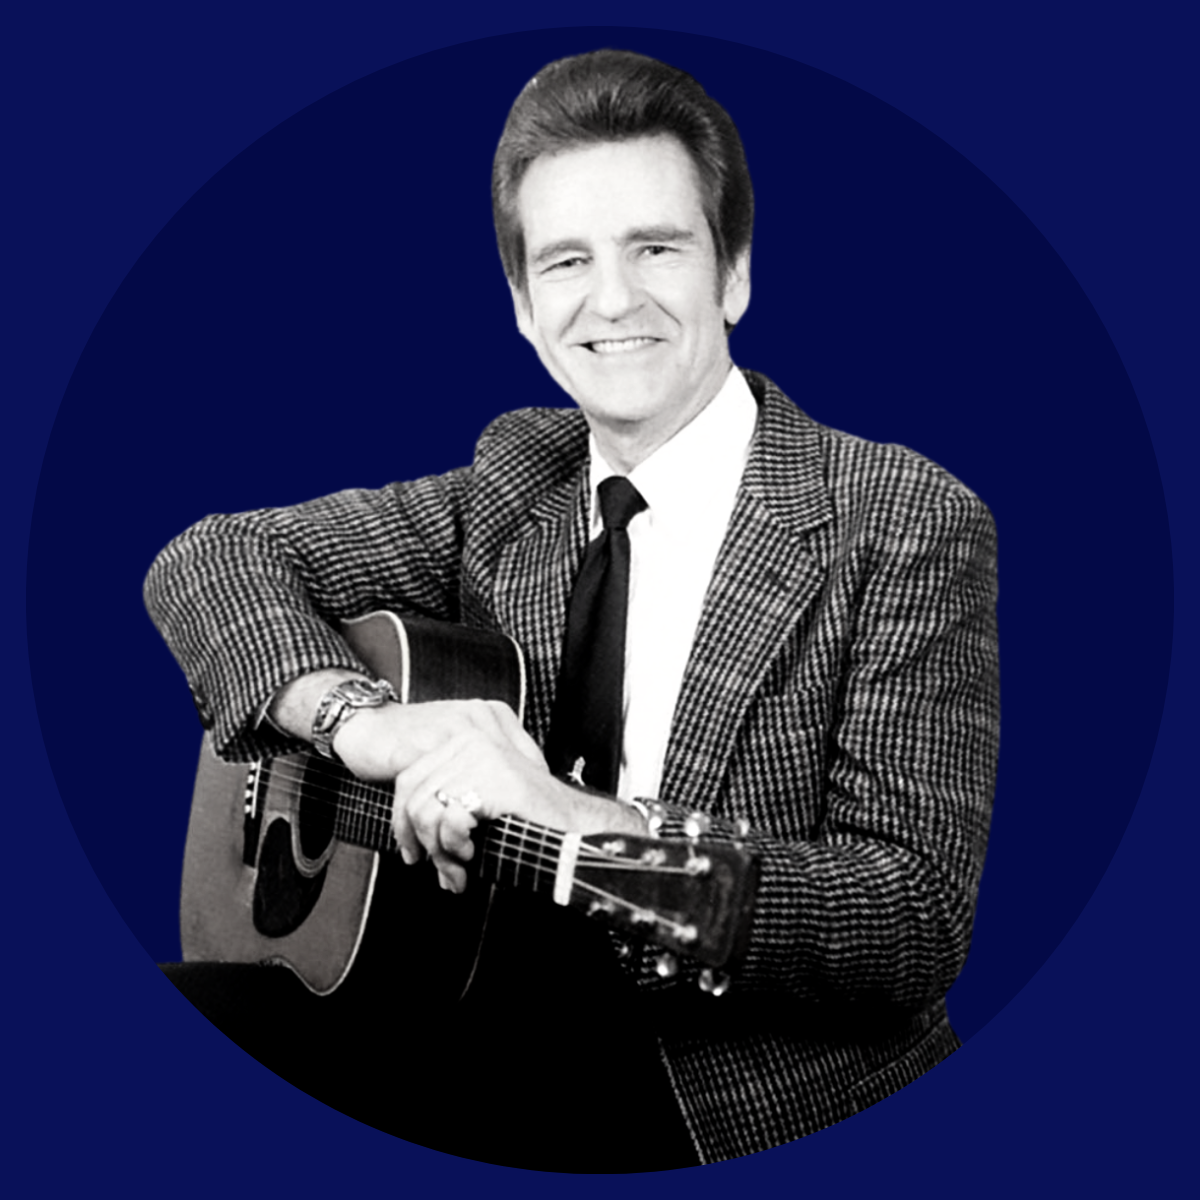 Del McCoury: Whatever Suits the Song